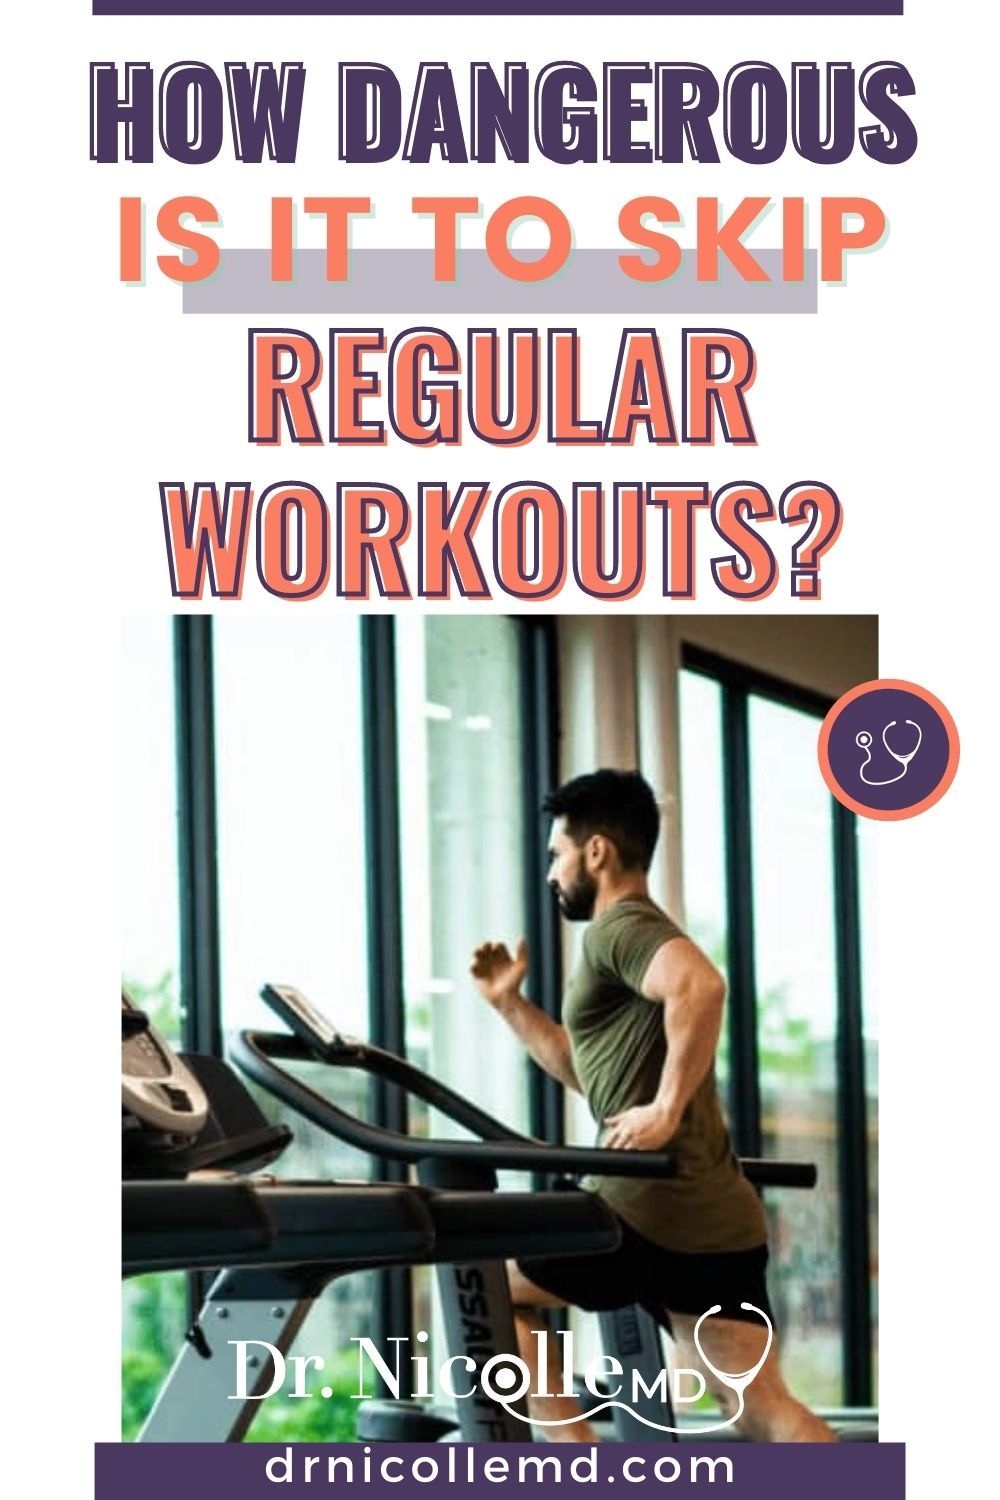 How Dangerous Is It to Skip Regular Workouts?